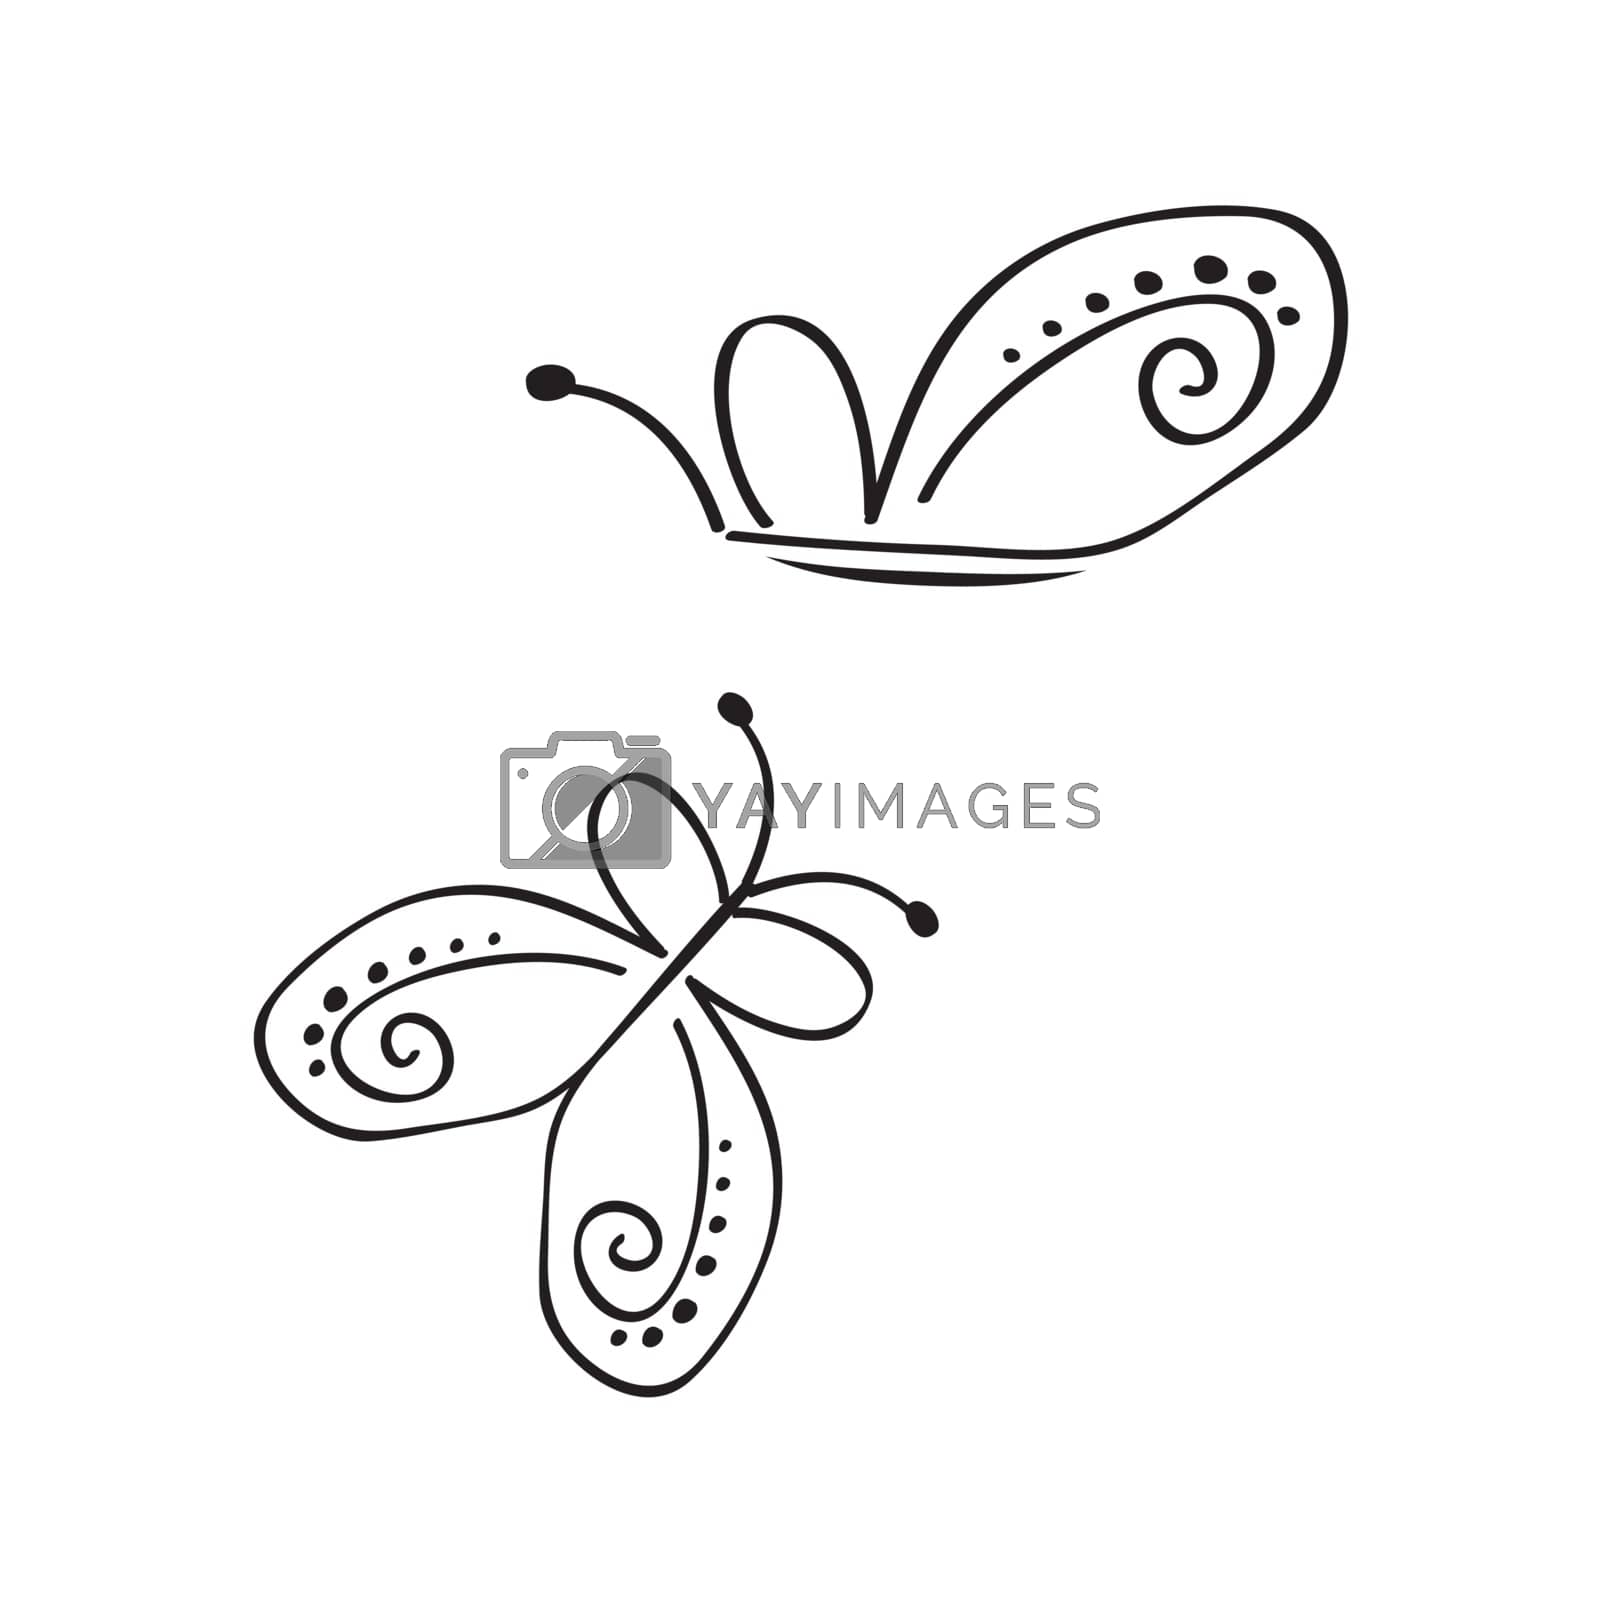 Royalty free image of collection of stylized butterfly by balasoiu